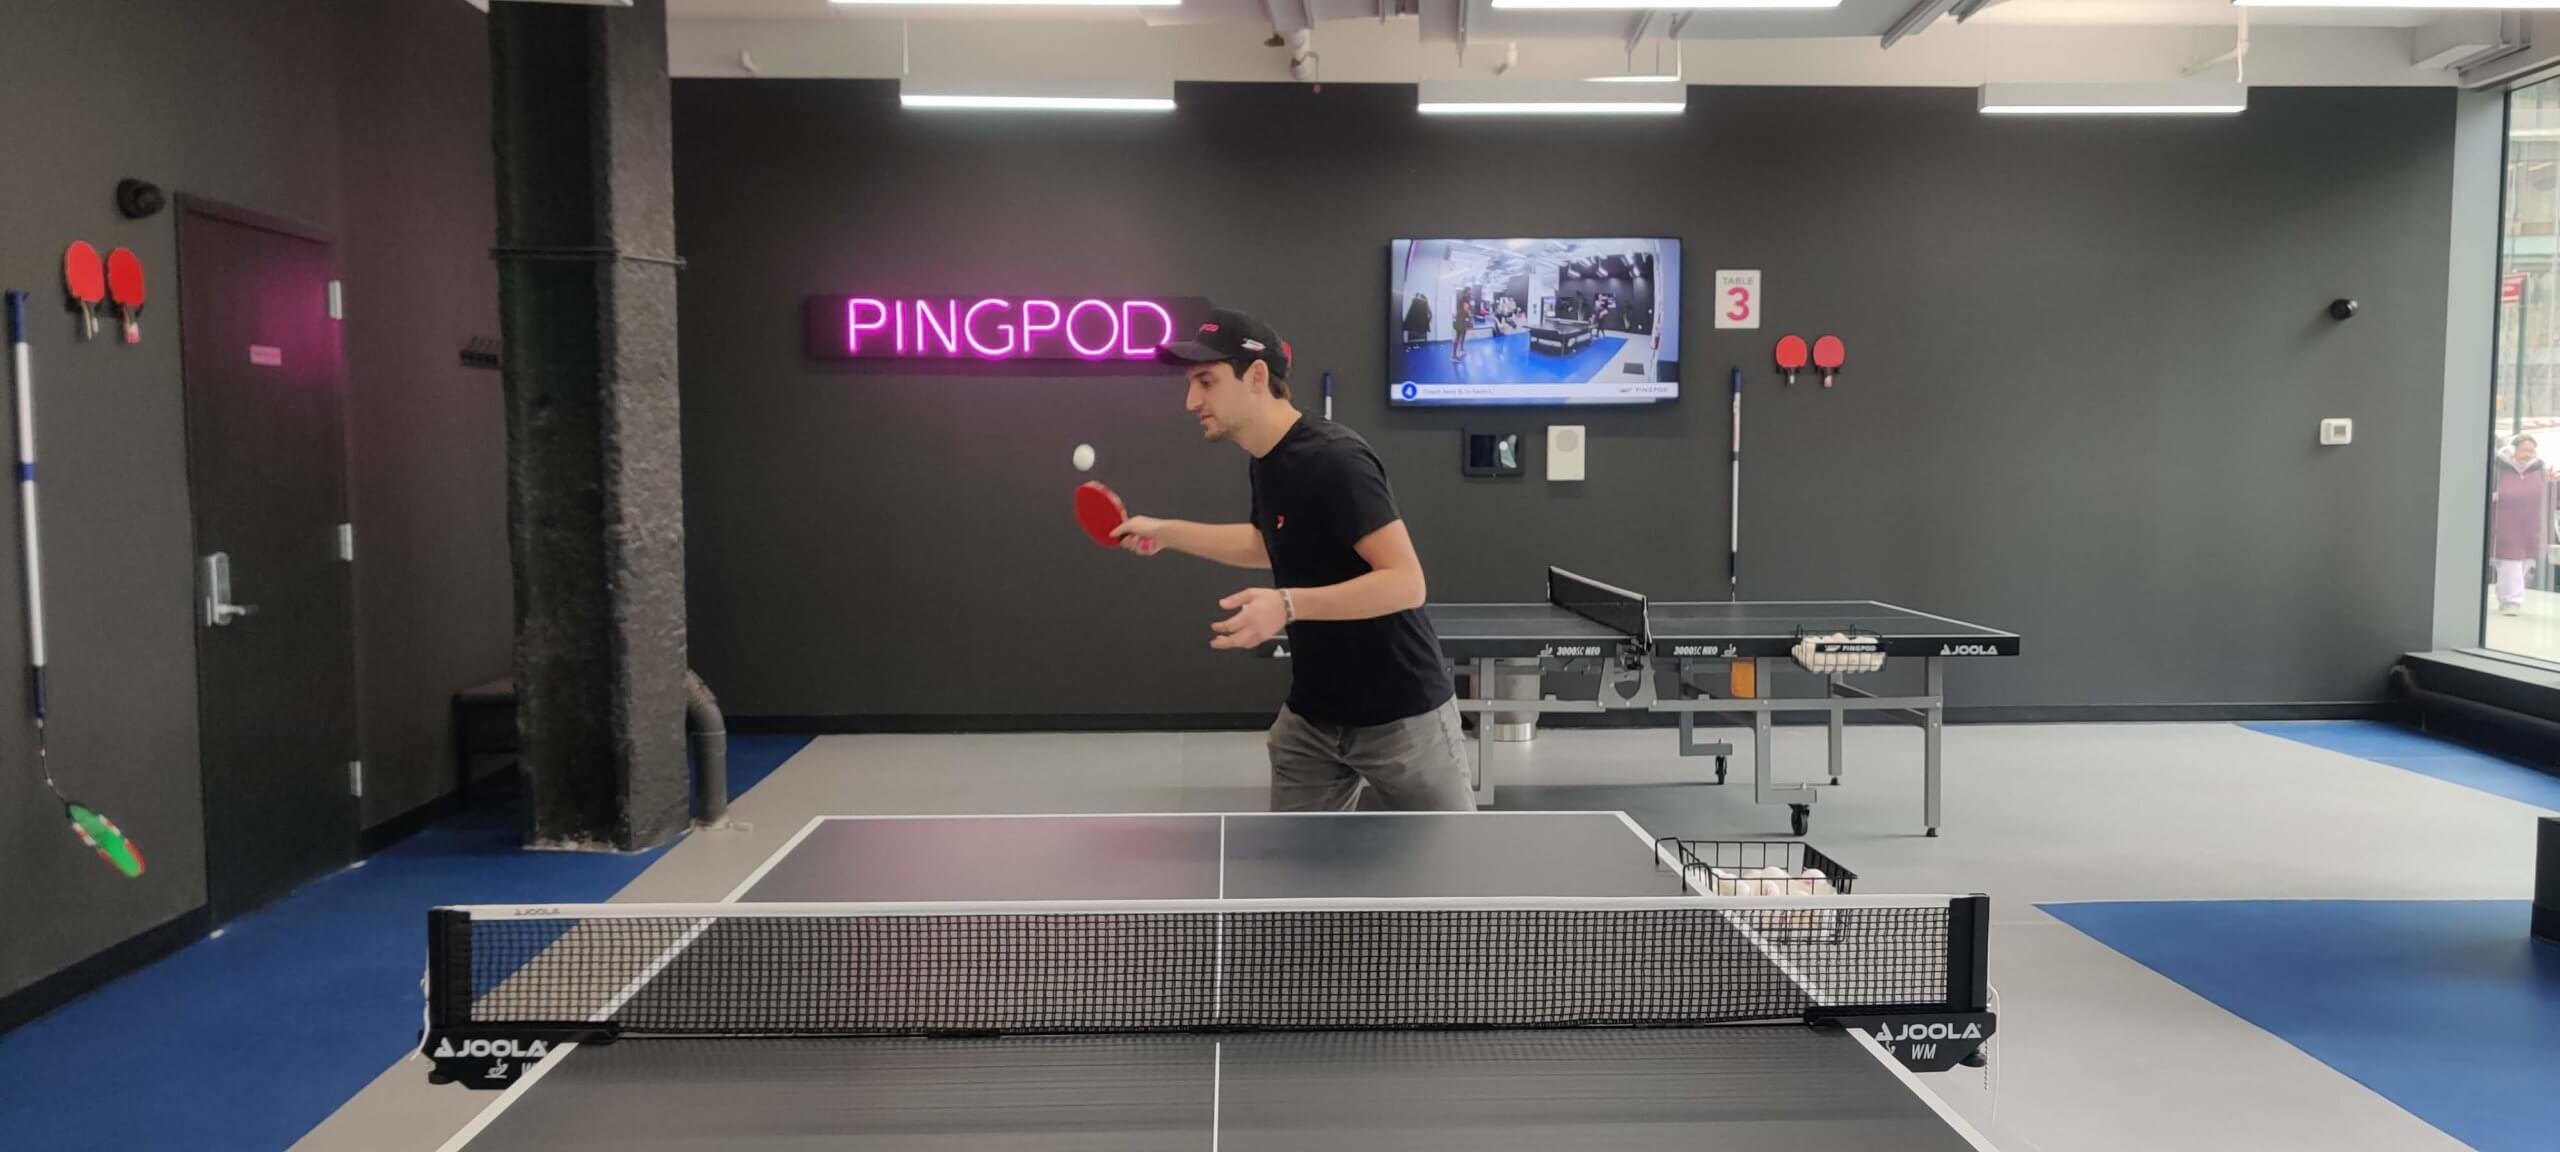 Fully automated and technologically equipped ping pong space to open in Downtown Brooklyn • Brooklyn Paper